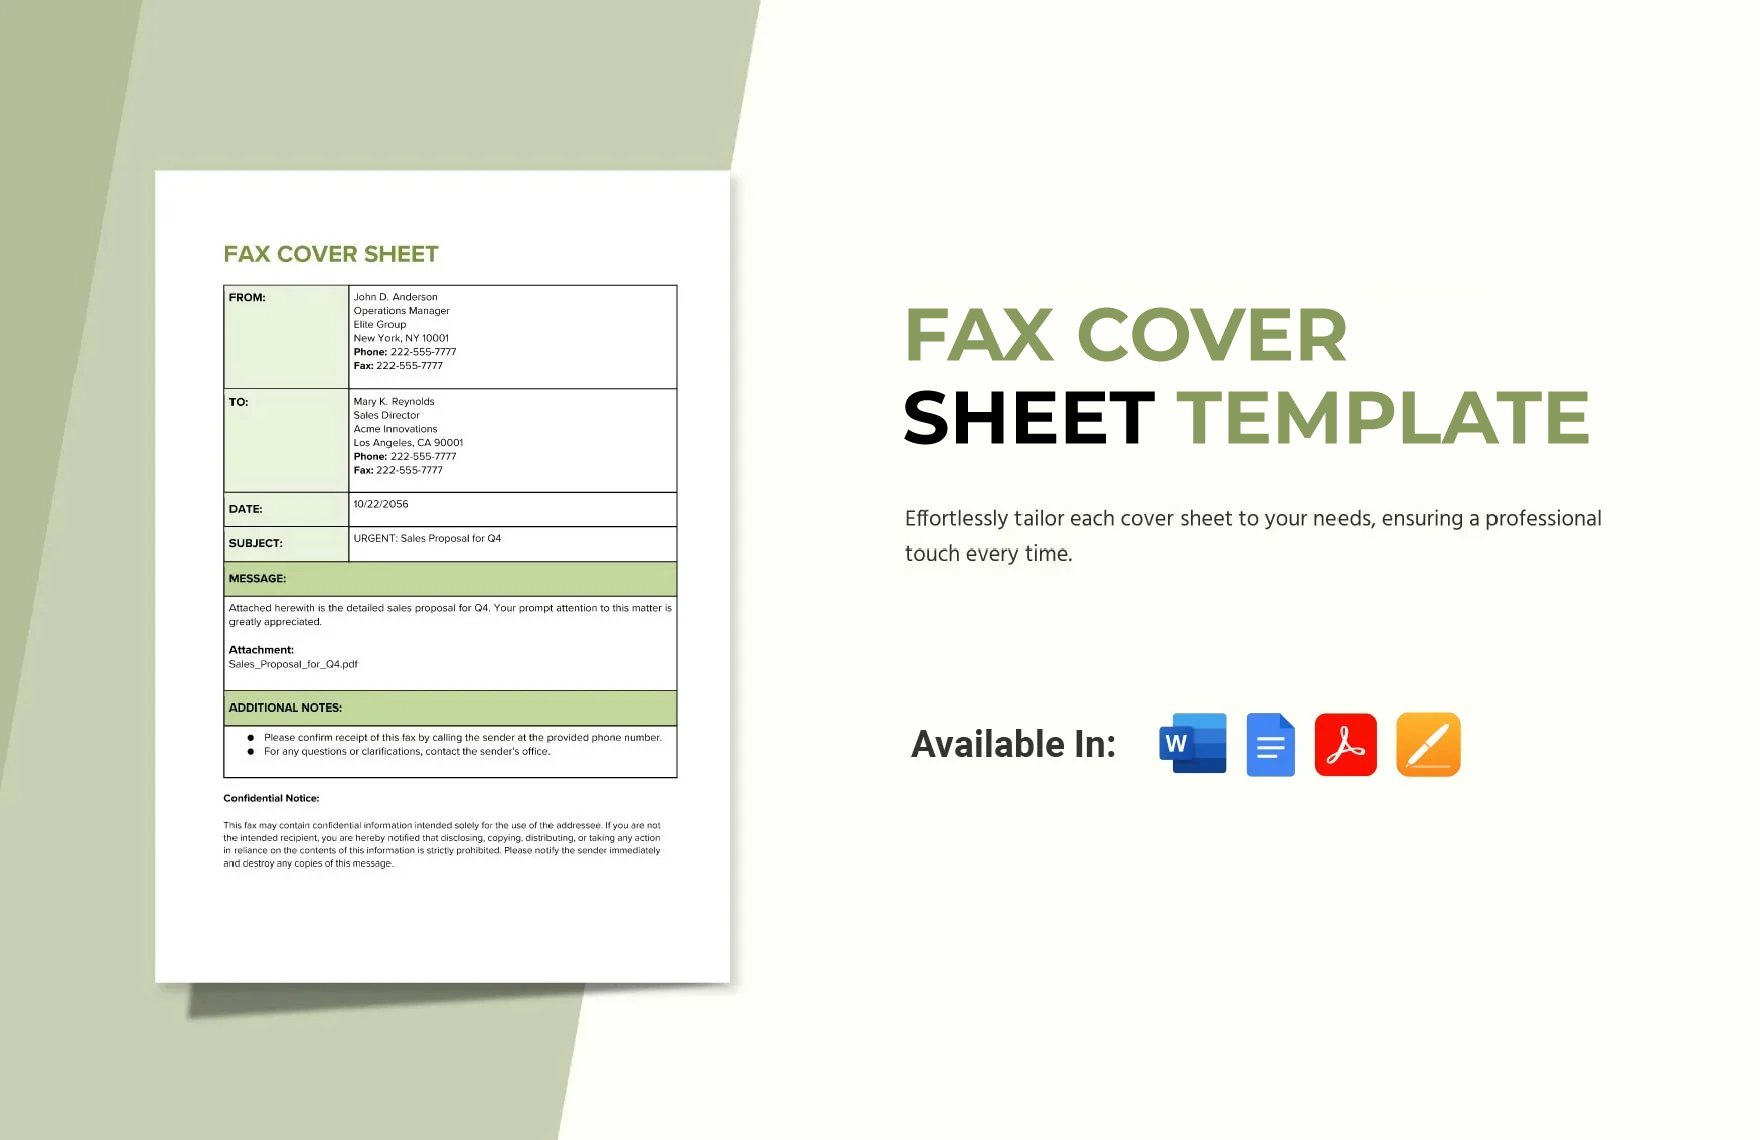 Free Fax Cover Sheet Template in Word, Google Docs, PDF, Apple Pages